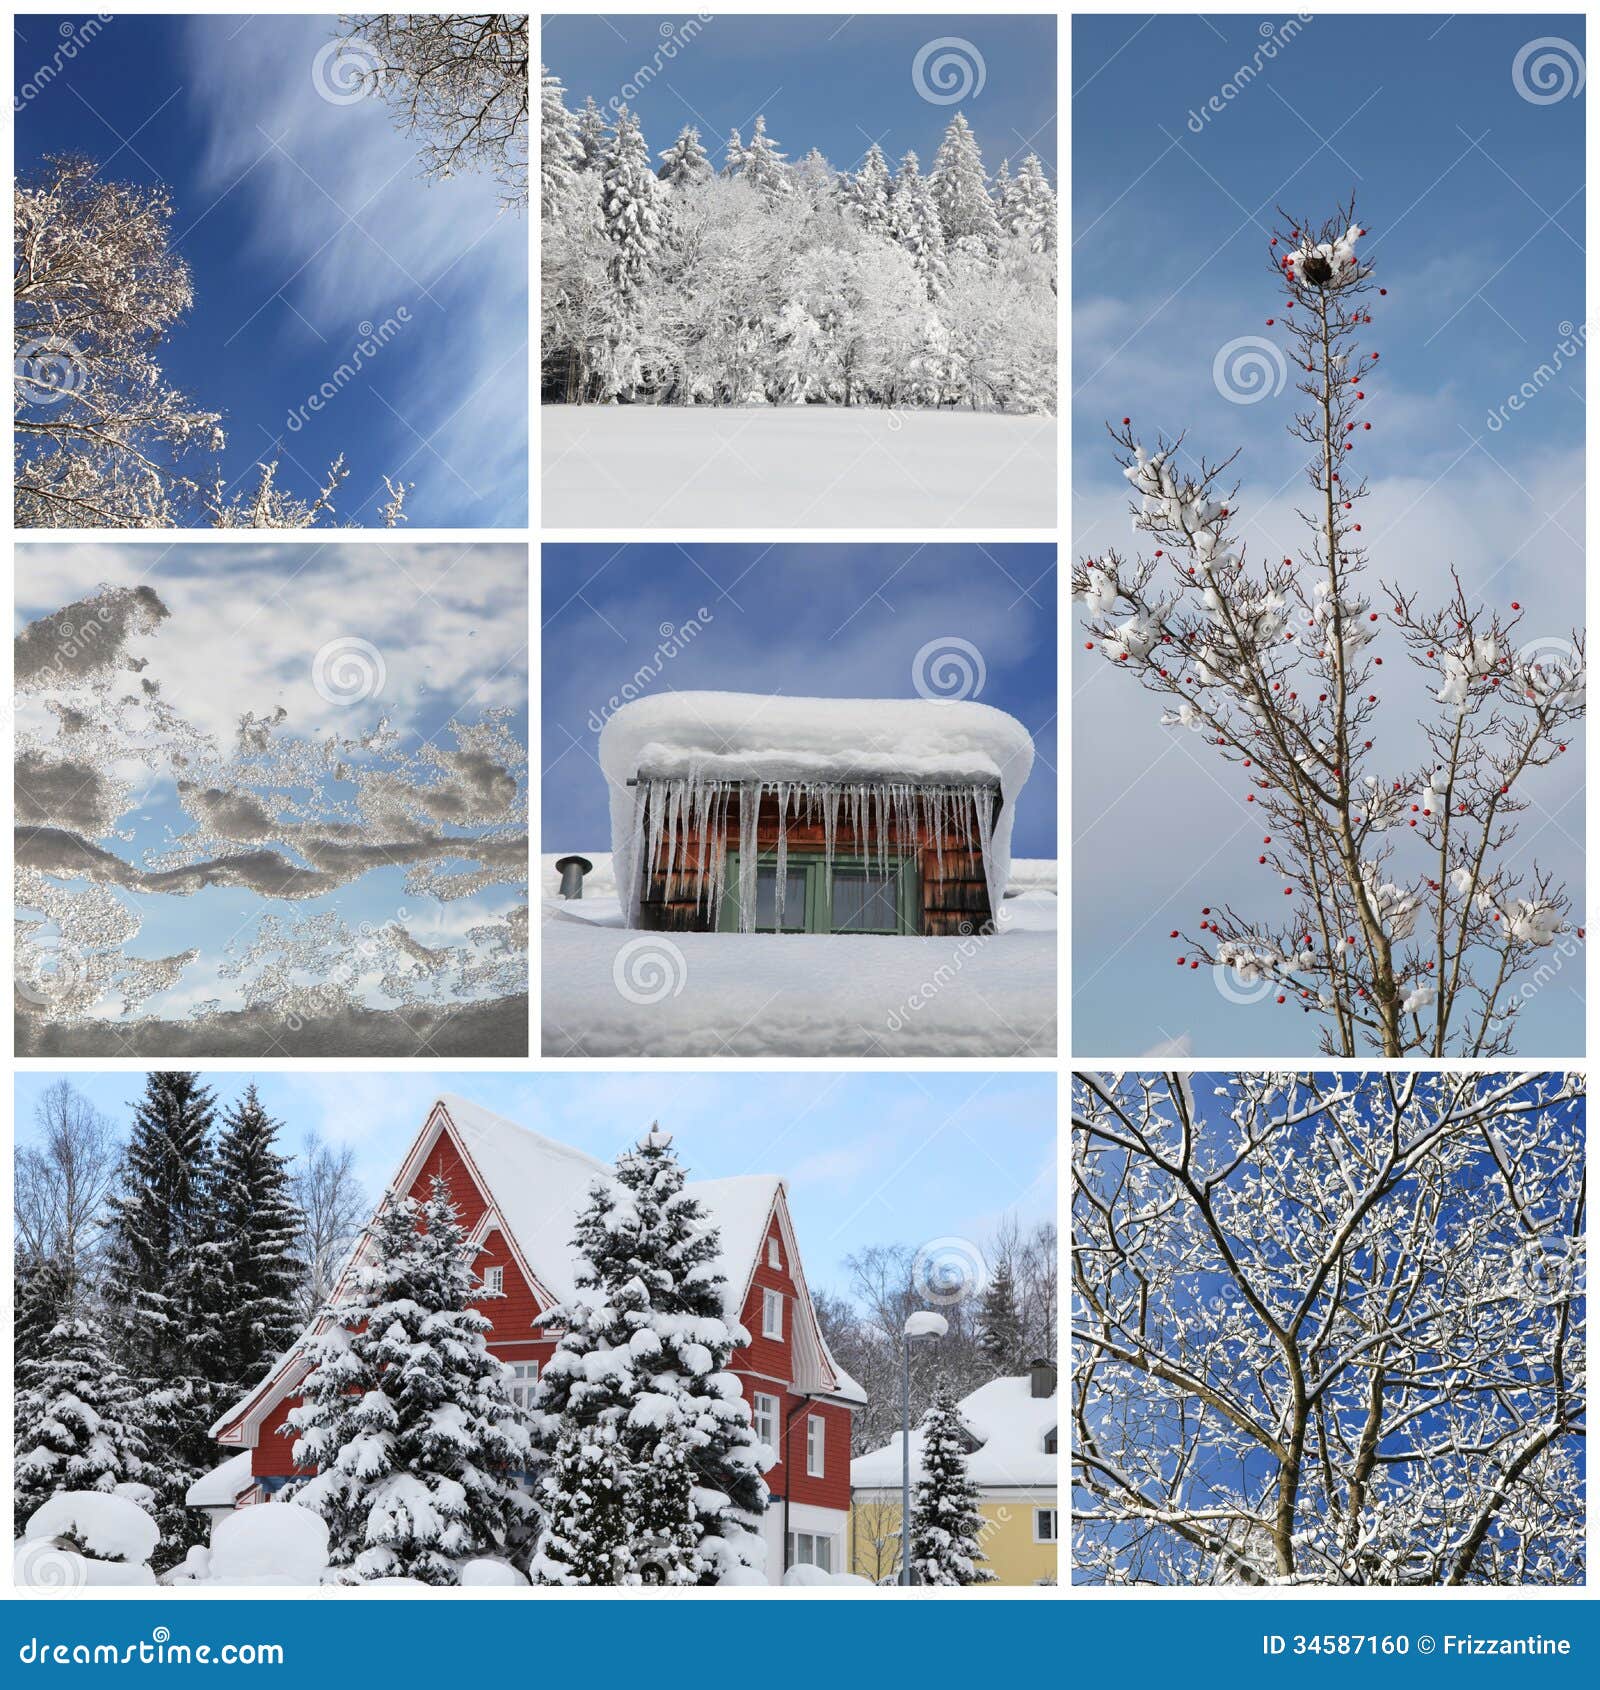 Winter Collage With Snow, Forest - Winter Season - Snowy 